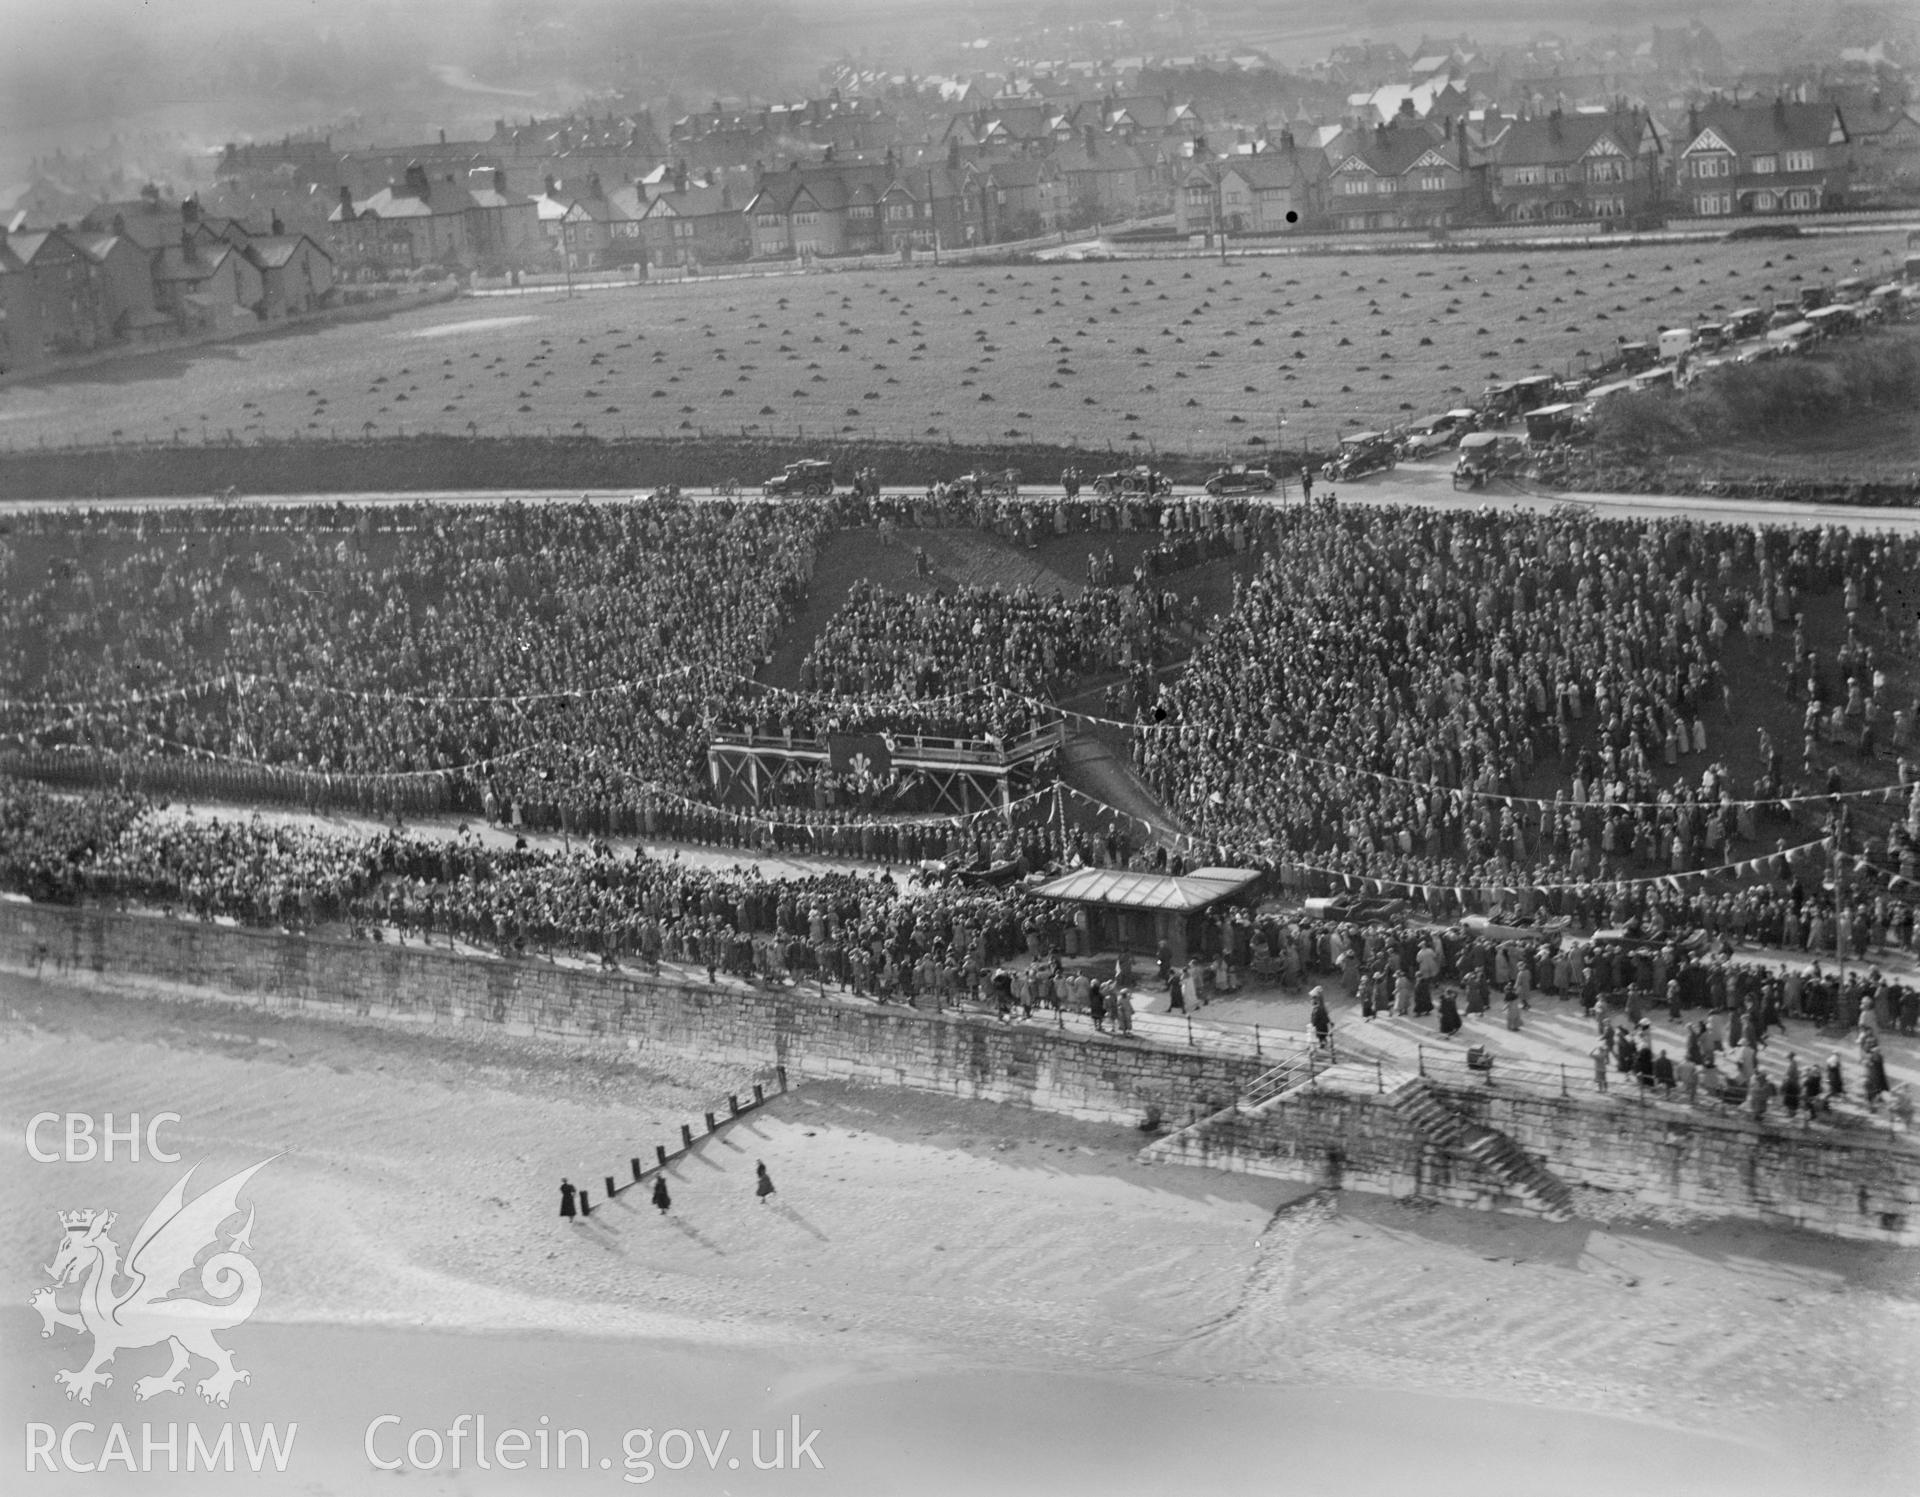 Colwyn Bay showing ceremony and crowds during during the visit of the Prince of Wales (later Edward VIII) in November 1923, oblique aerial view. 5?x4? black and white glass plate negative.